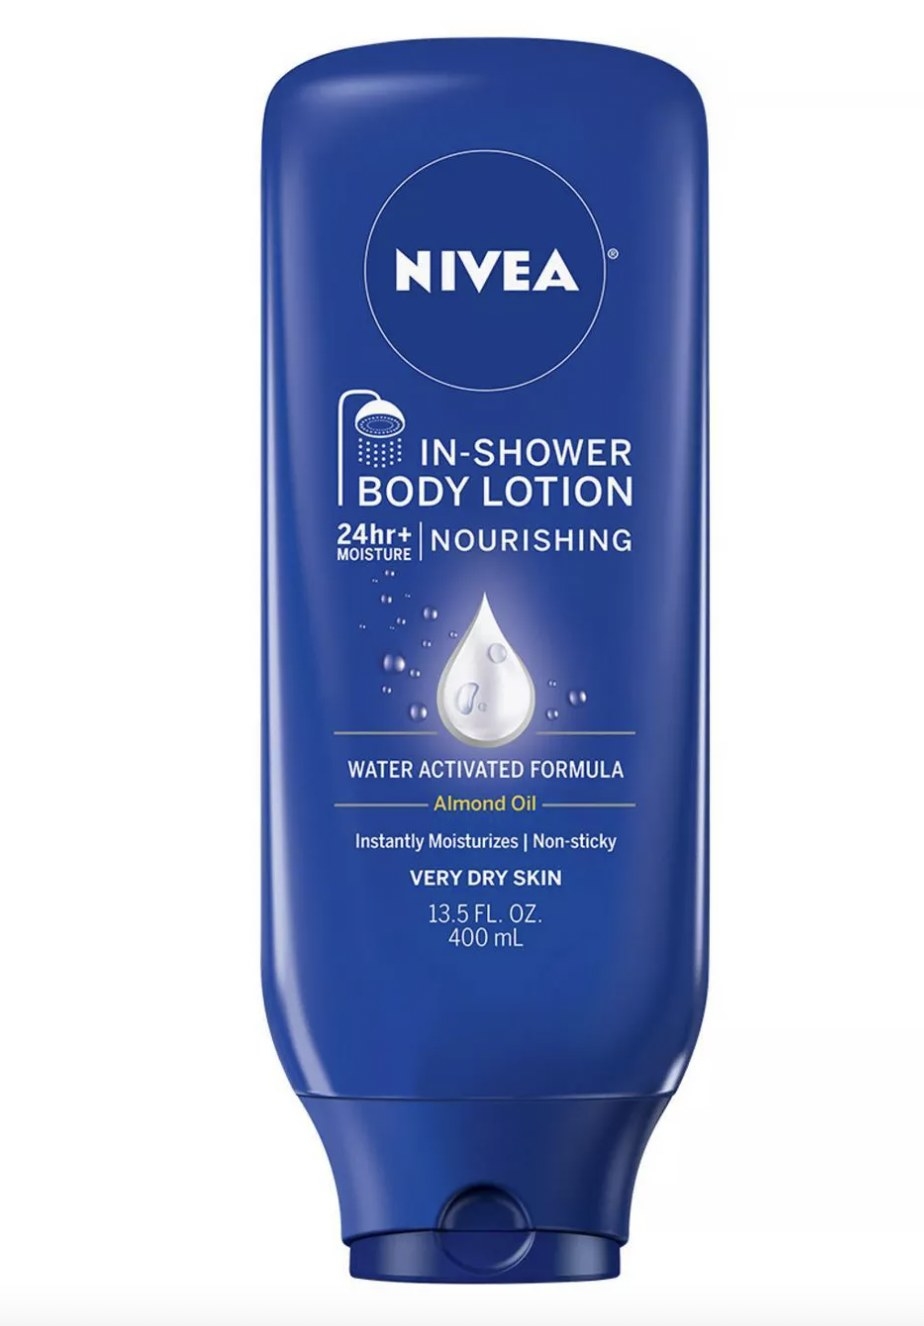 A bottle of in-shower lotion